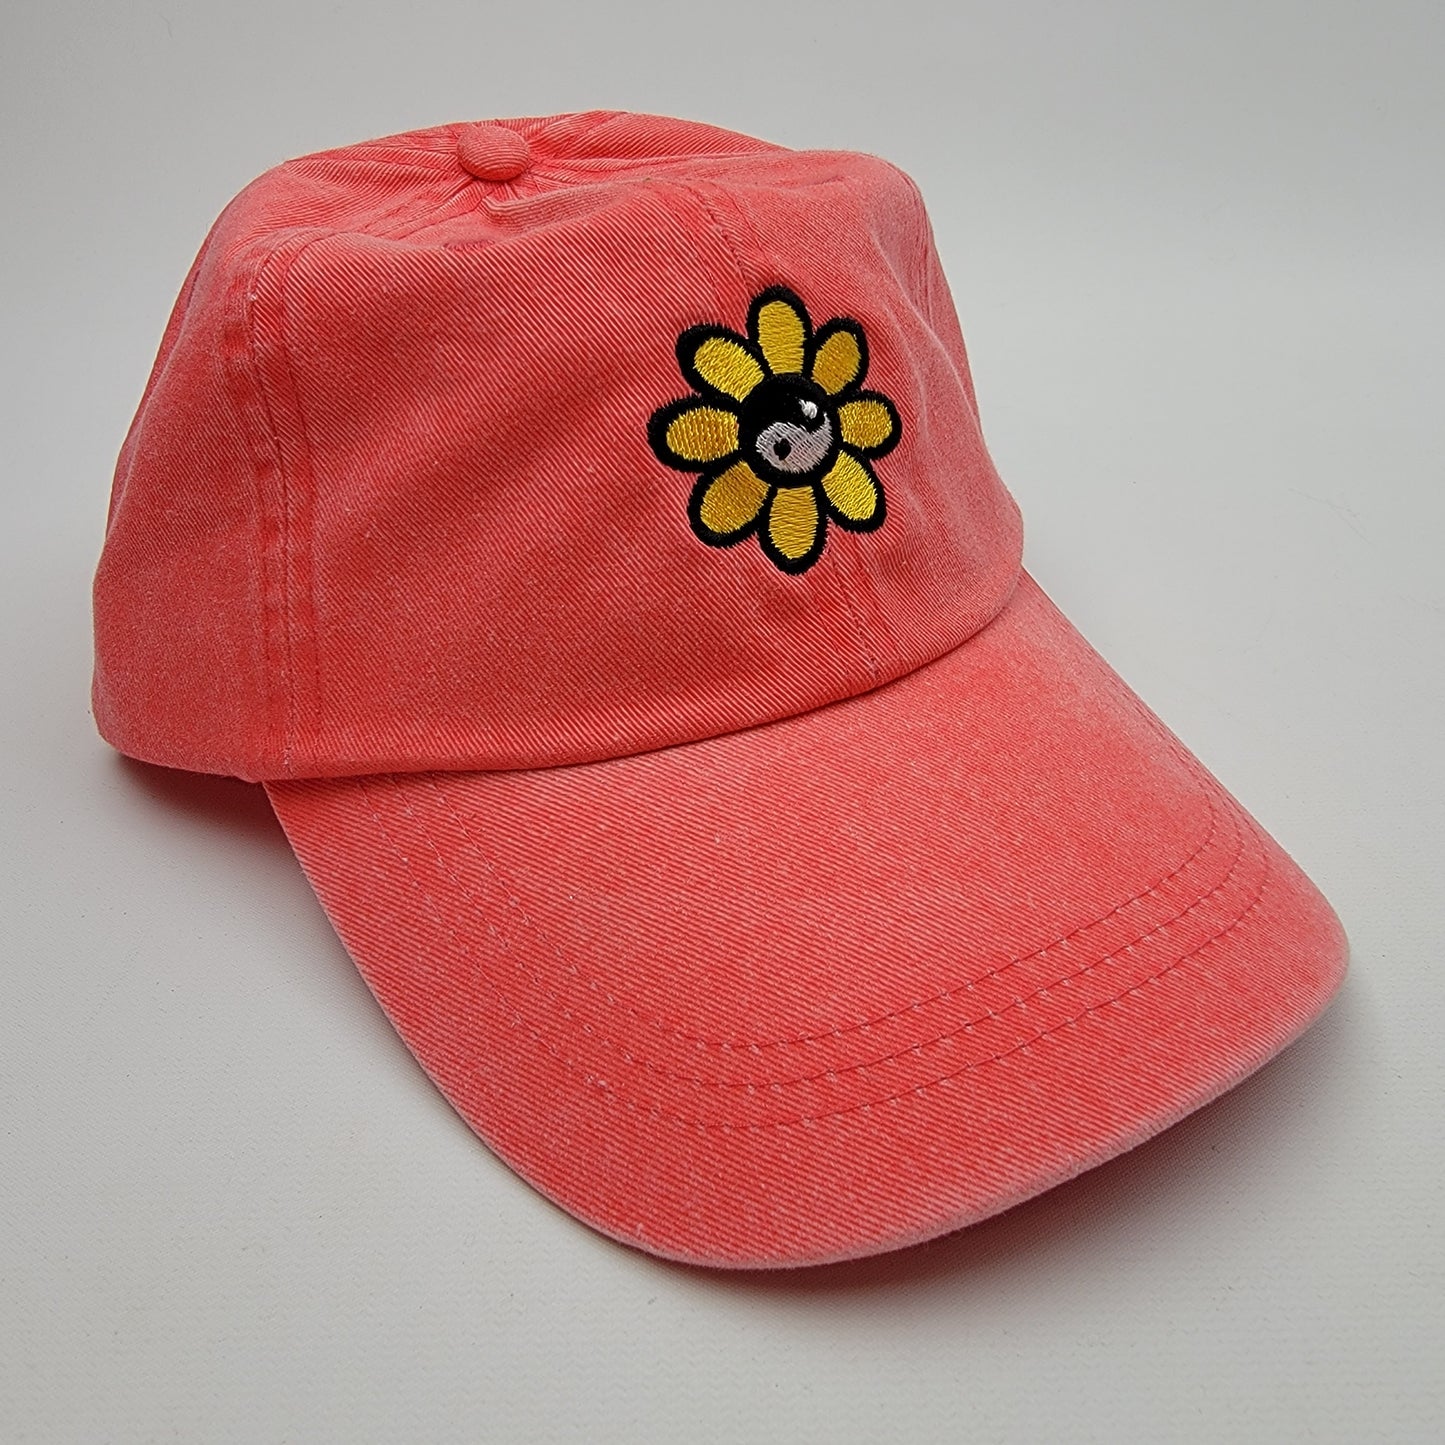 Yin & Yang Sunflower Relaxed Cotton Women's Embroidered Buckle Strap Curved Bill Hat Cap Garment Washed Orange